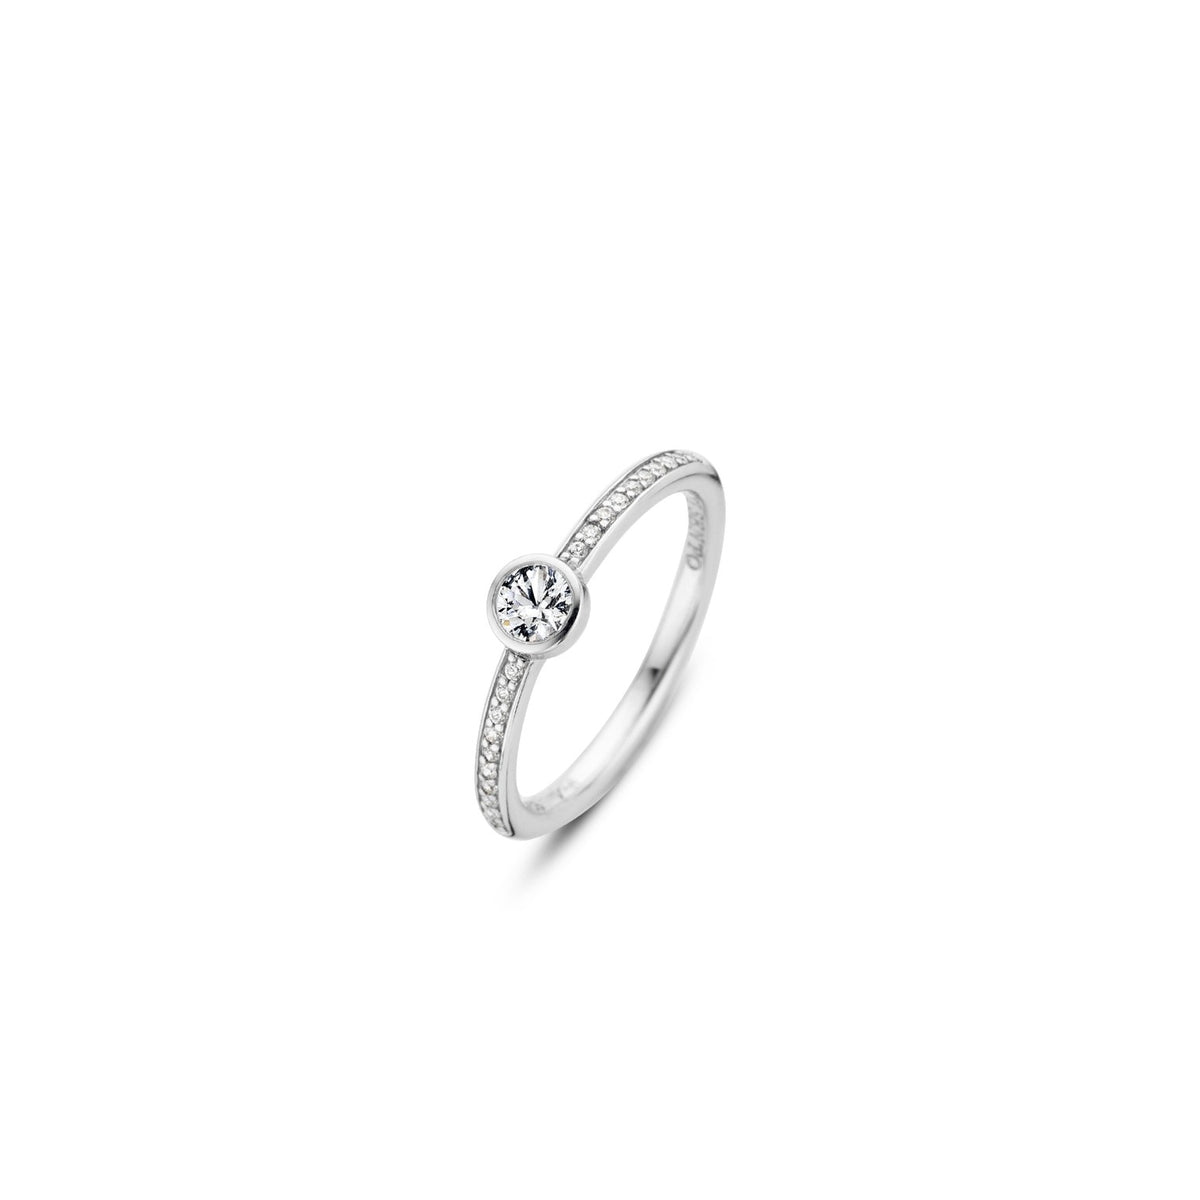 TI SENTO Sterling Silver Half Eternity Ring with Bezel Set Center Cubic Zirconia